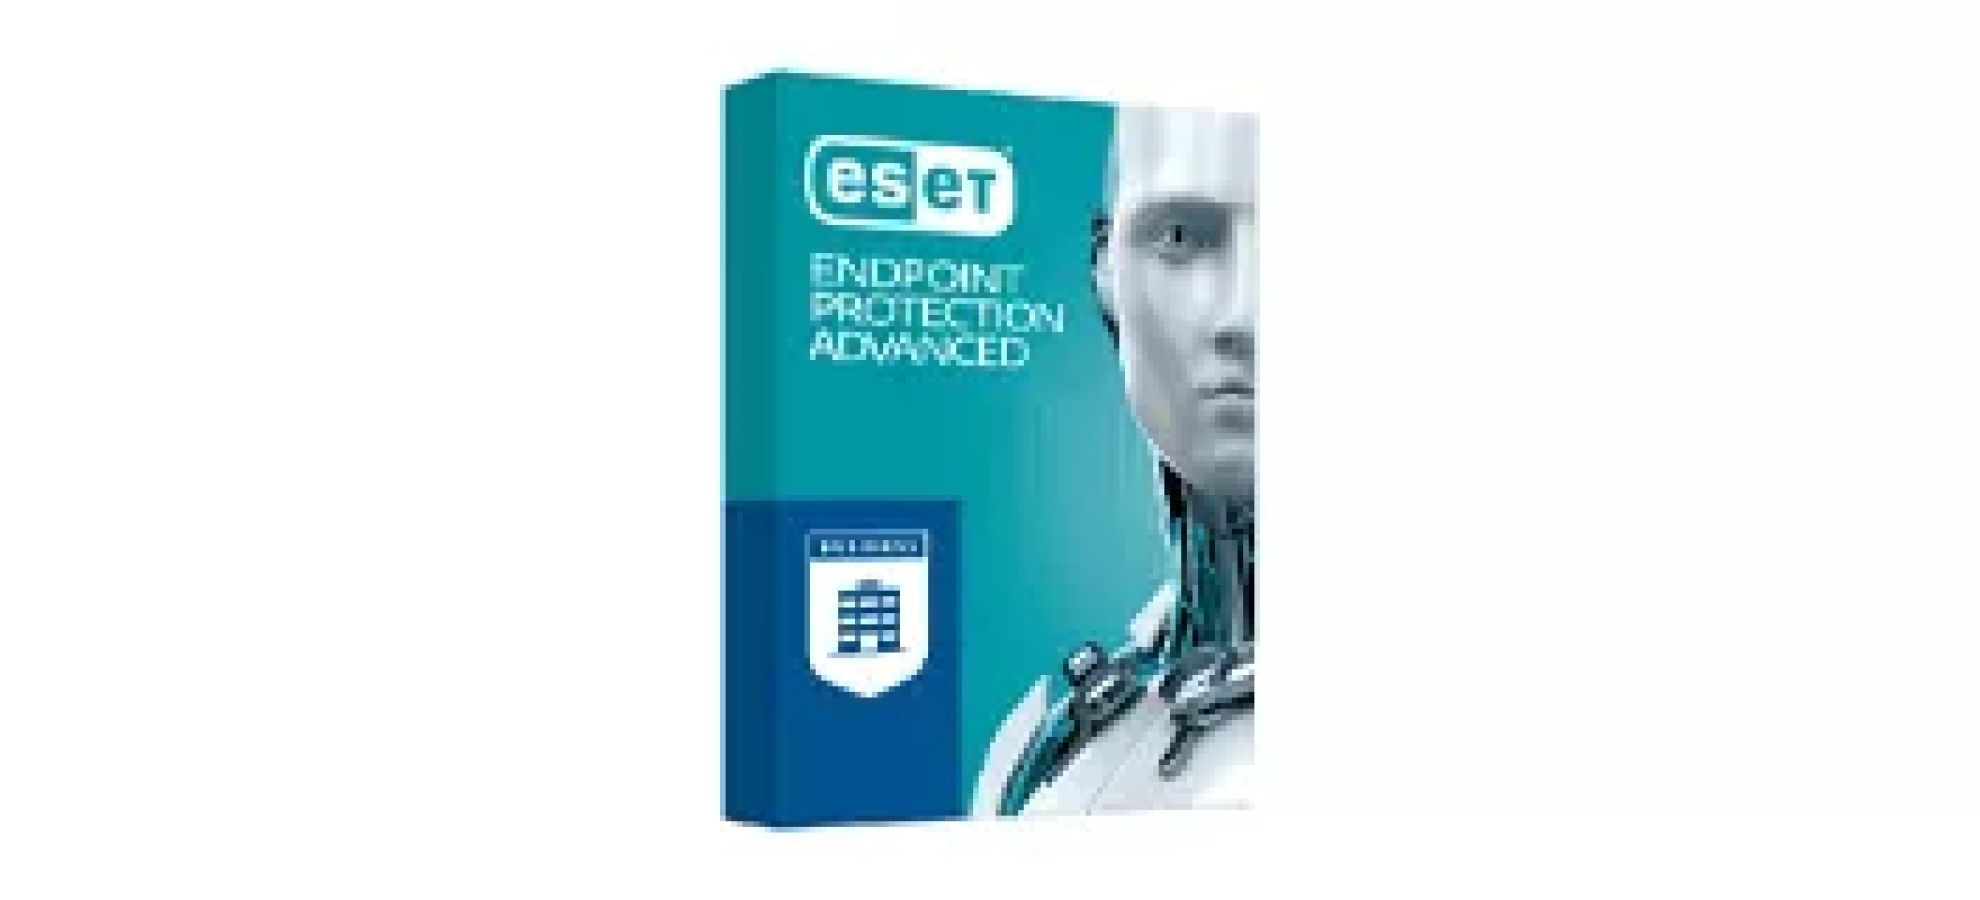 ESET Endpoint Protection Advanced - hello RSE